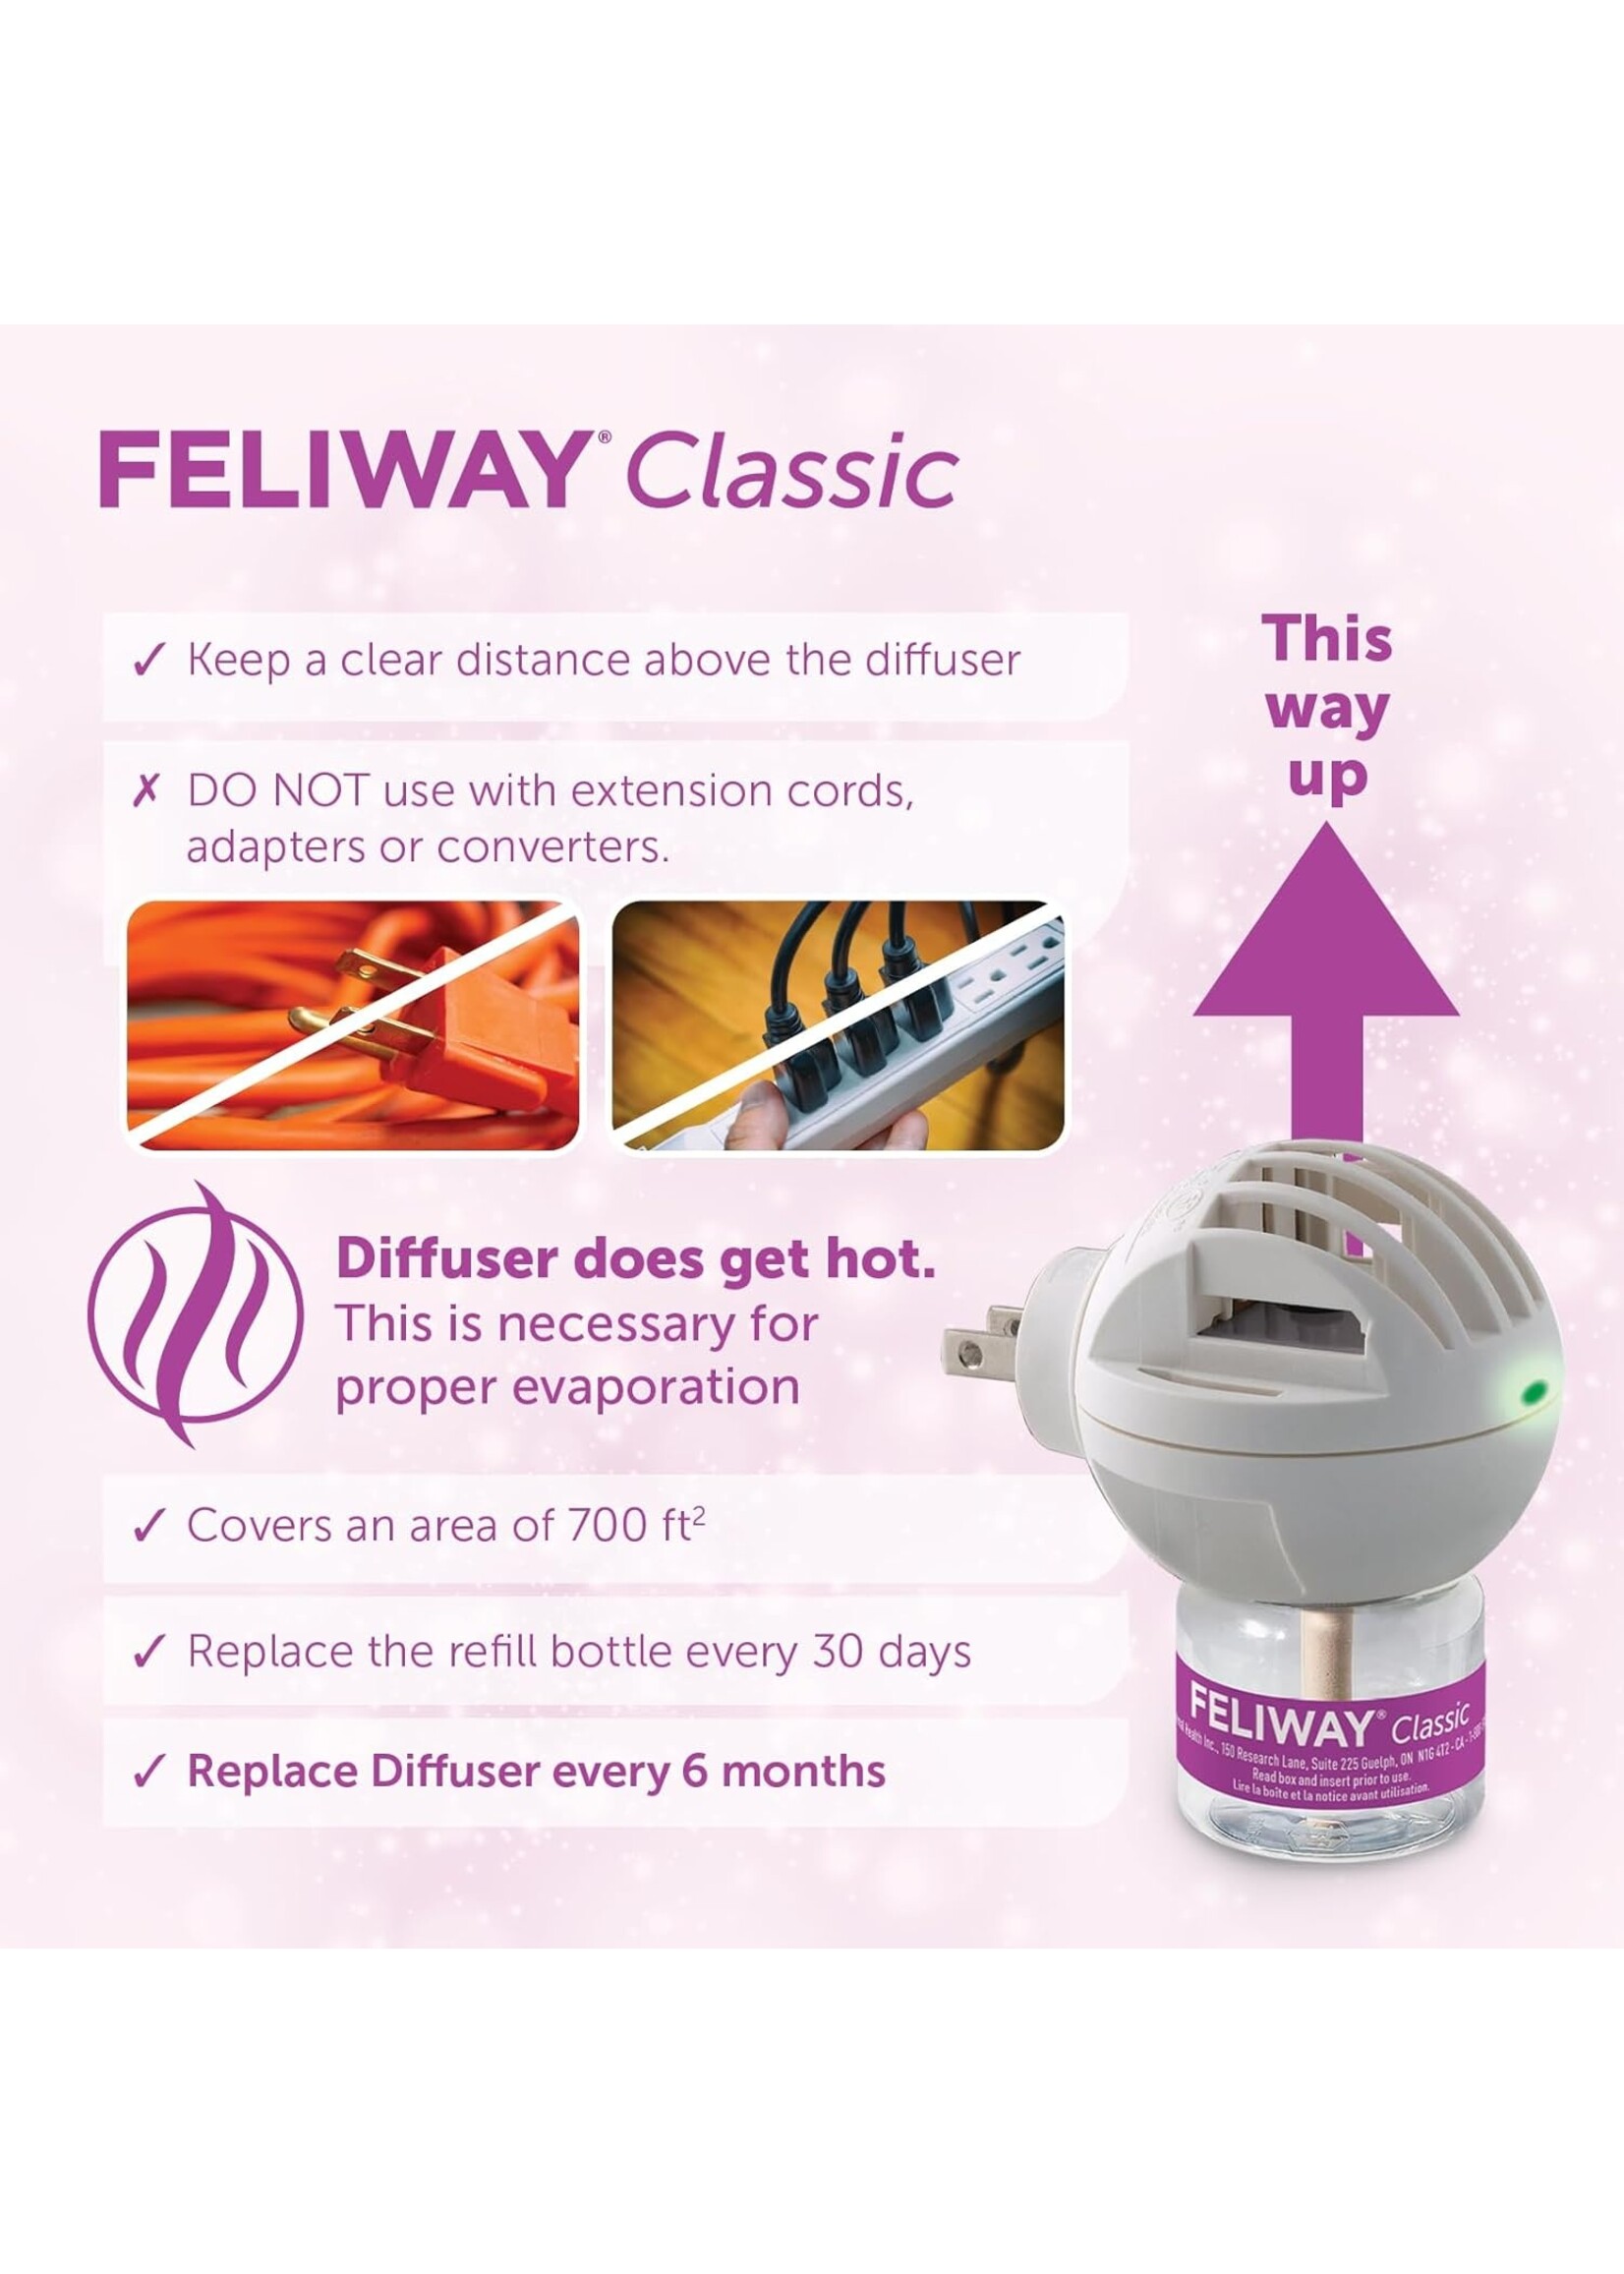 Feliway Cat classic 30-Day Refill 3pack